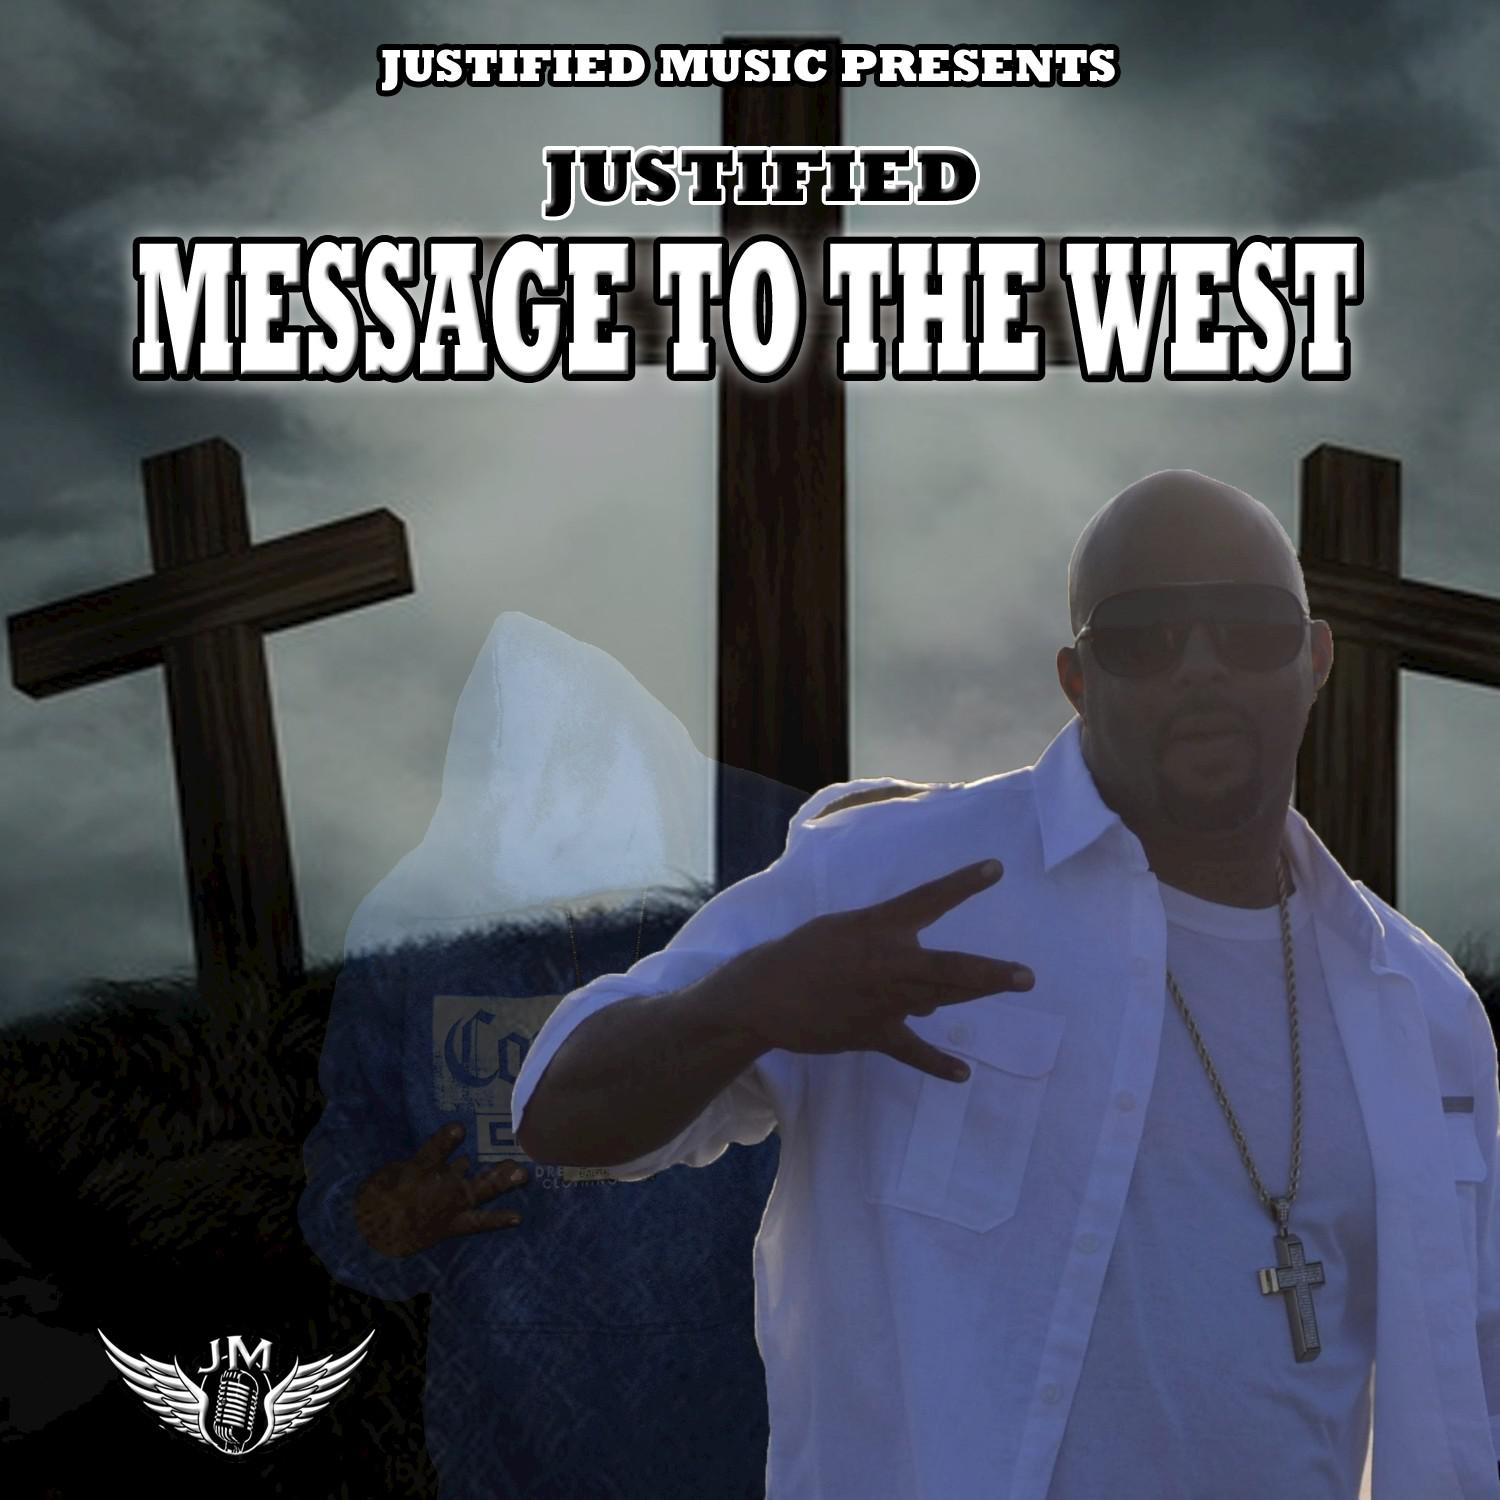 Message to the West